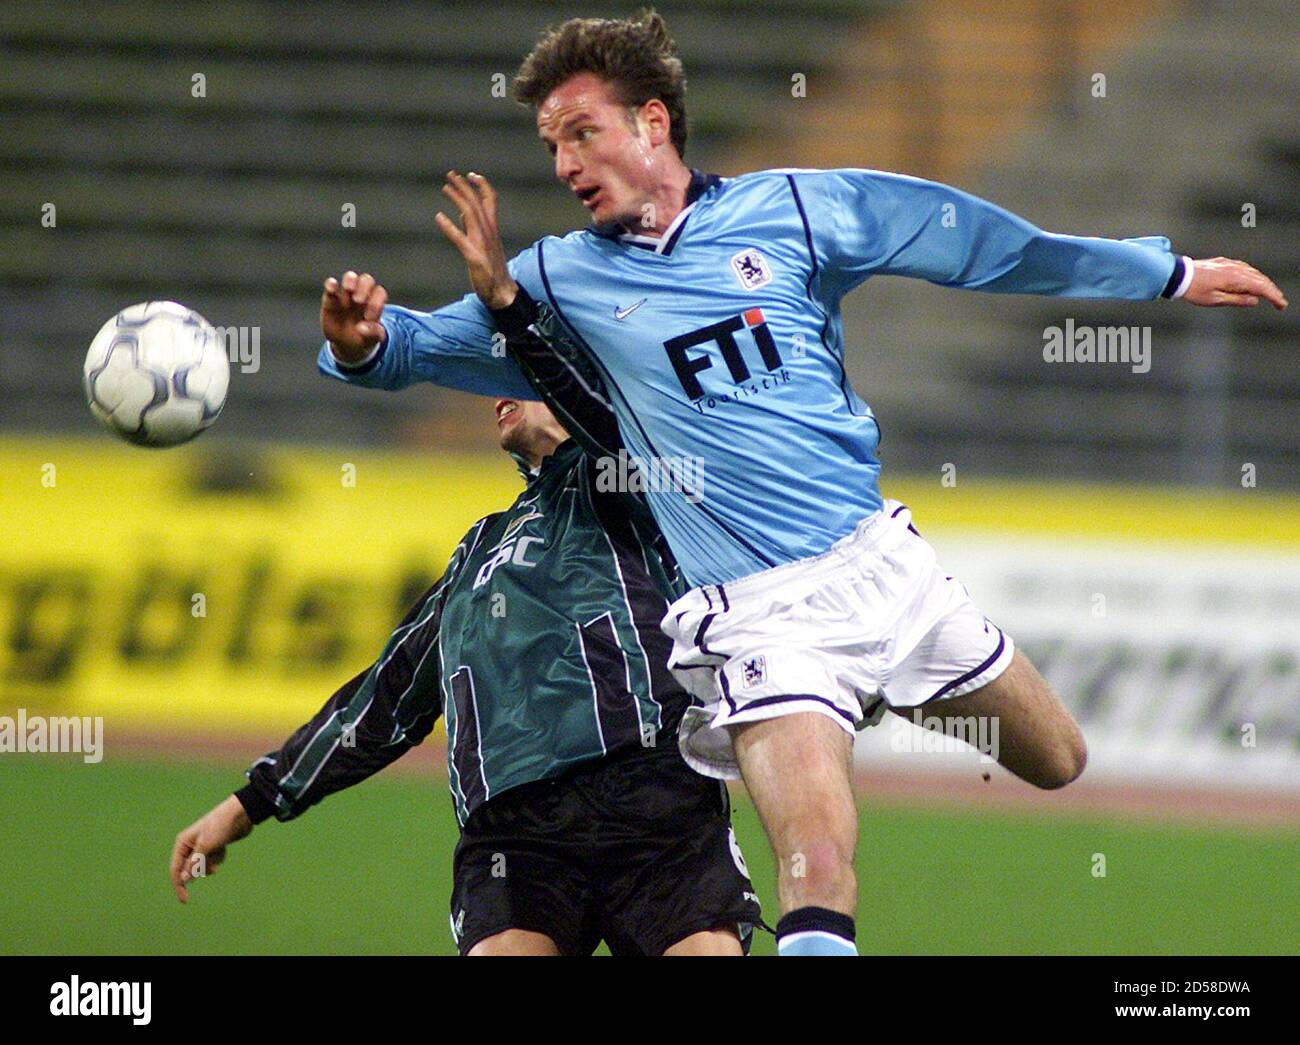 CERNY FROM TSV 1860 MUNICH CHALLENGES BAUMANN FROM WERDER BREMEN DURING FIRST DIVISION SOCCER MATCH IN MUNICH.   Harald Cerny (R) from TSV 1860 Munich challenges Frank Baumann from Werder Bremen during their German first division soccer match in Munich's olympic stadium, March 19. Munich won the match 1-0. Stock Photo